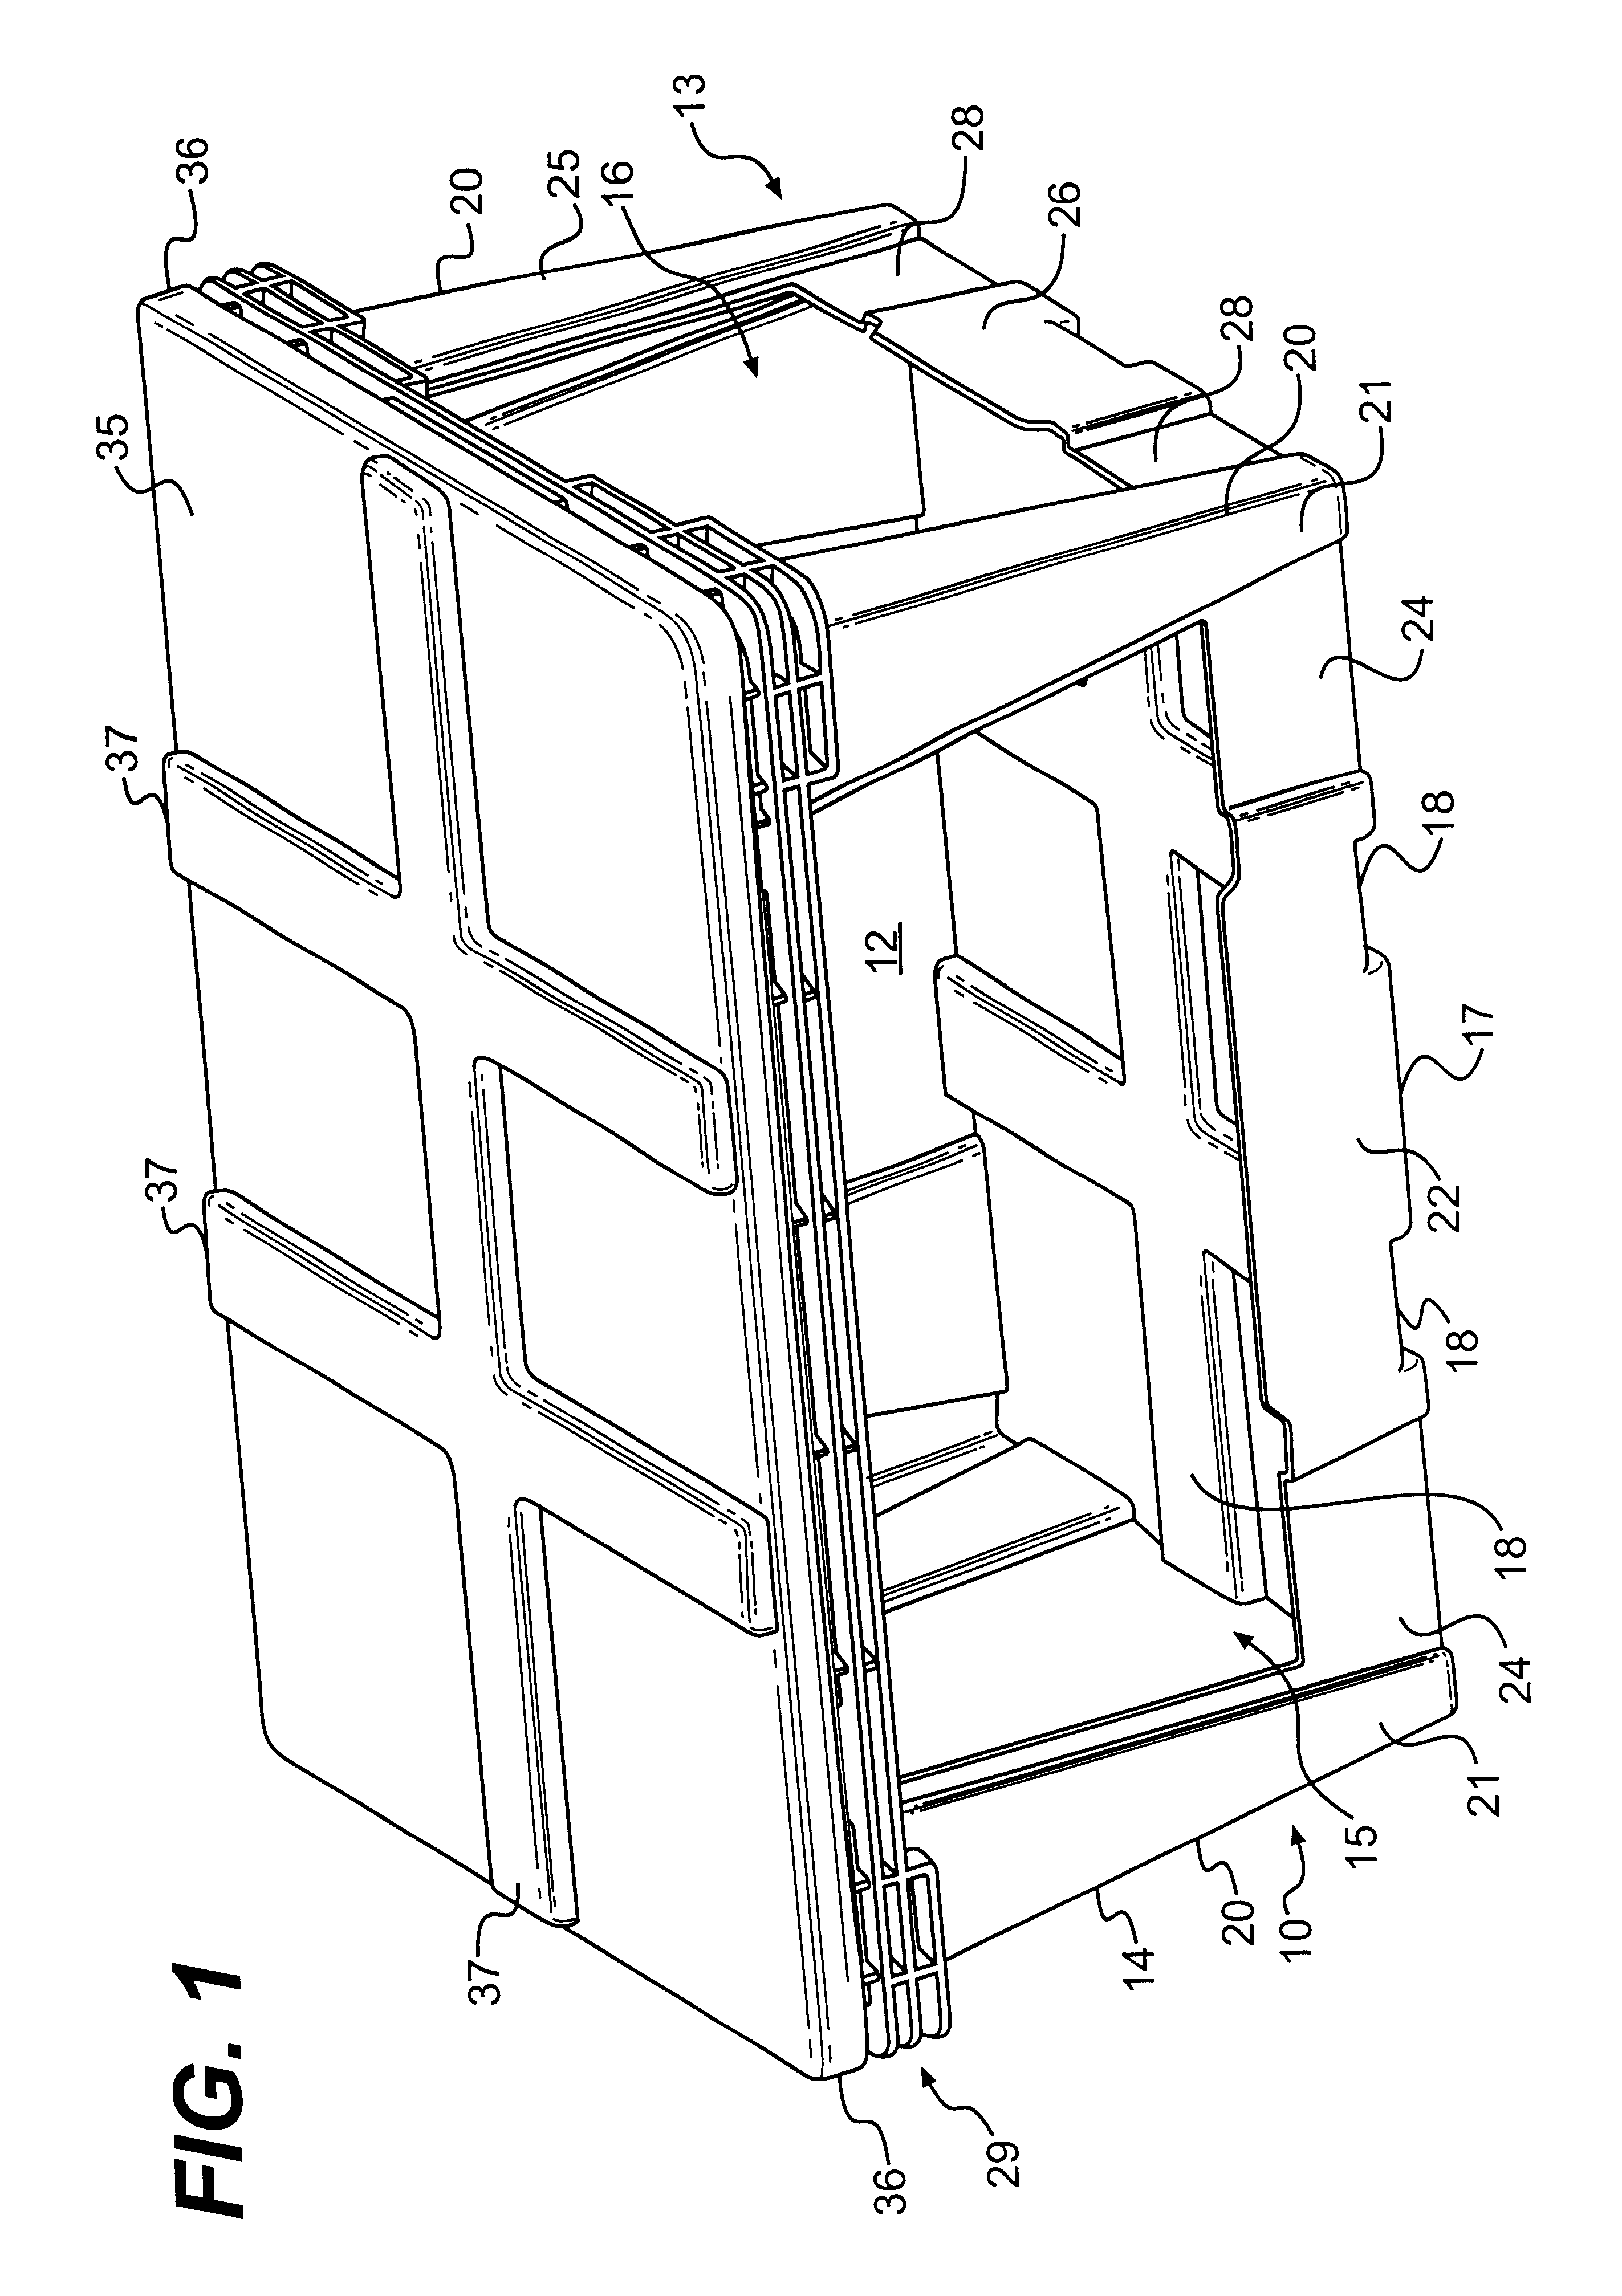 Nestable container with expendable closure panel covering access opening in container wall